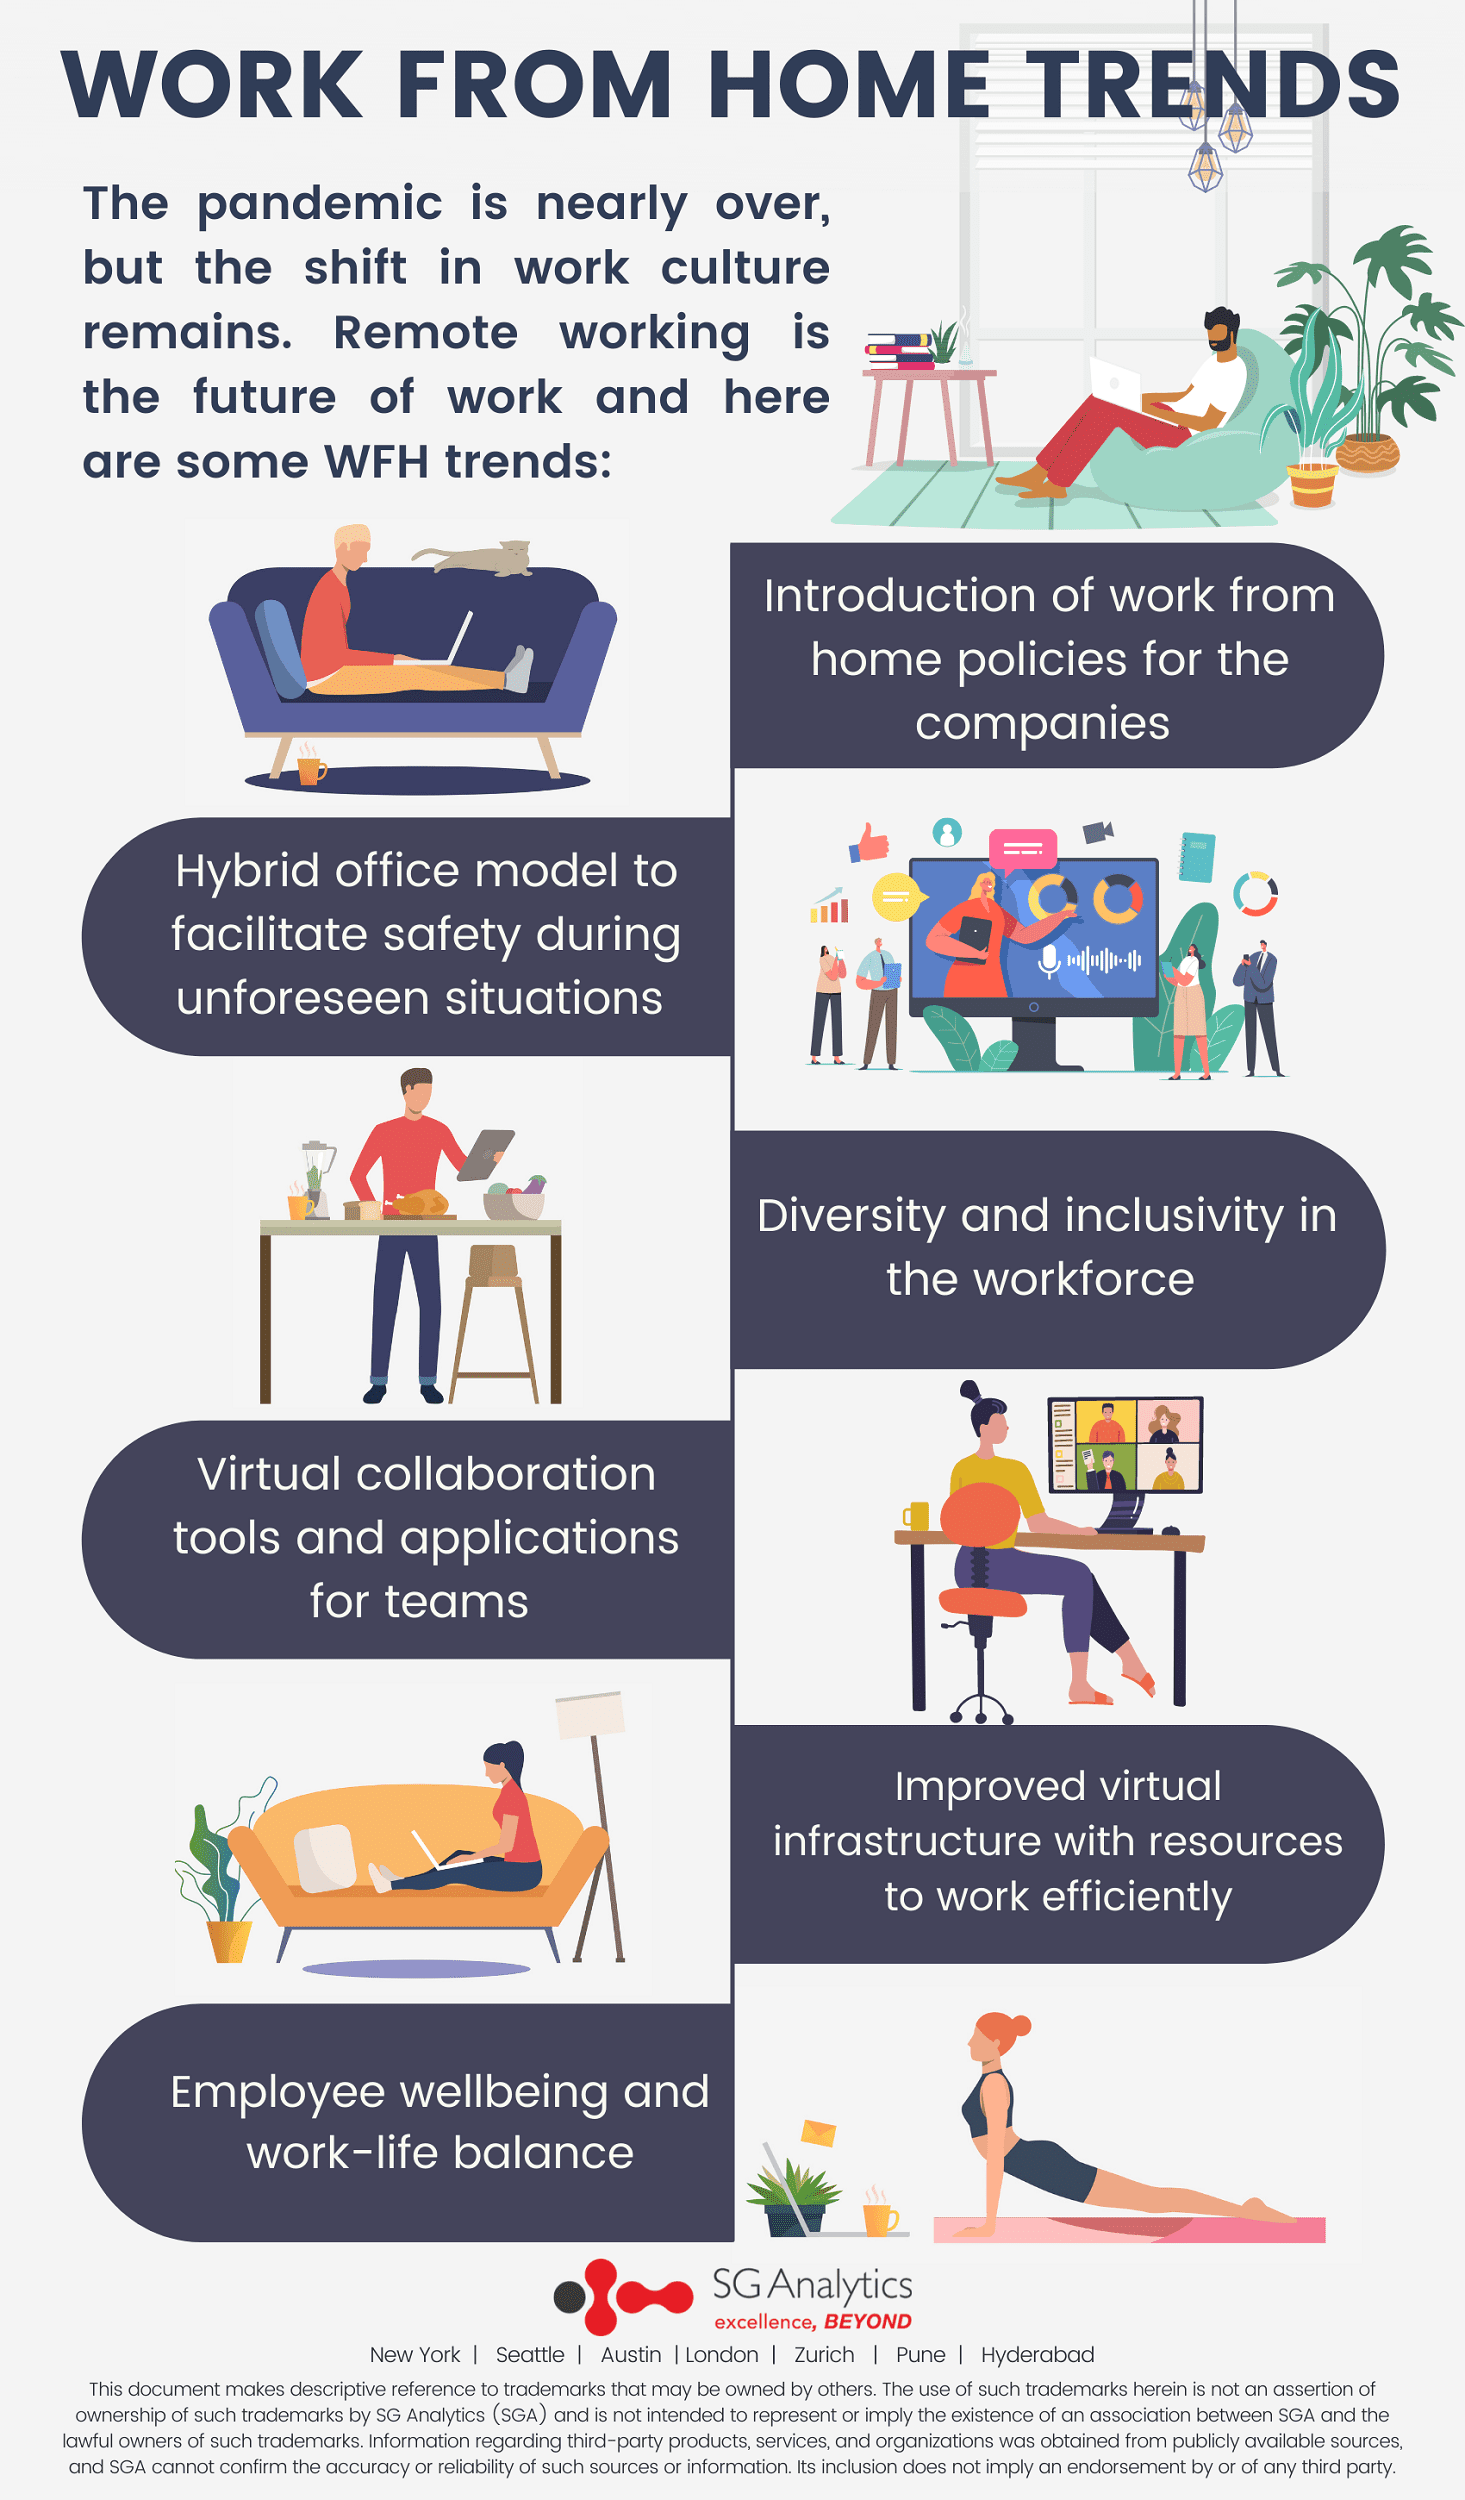 Work from home trends - infographic